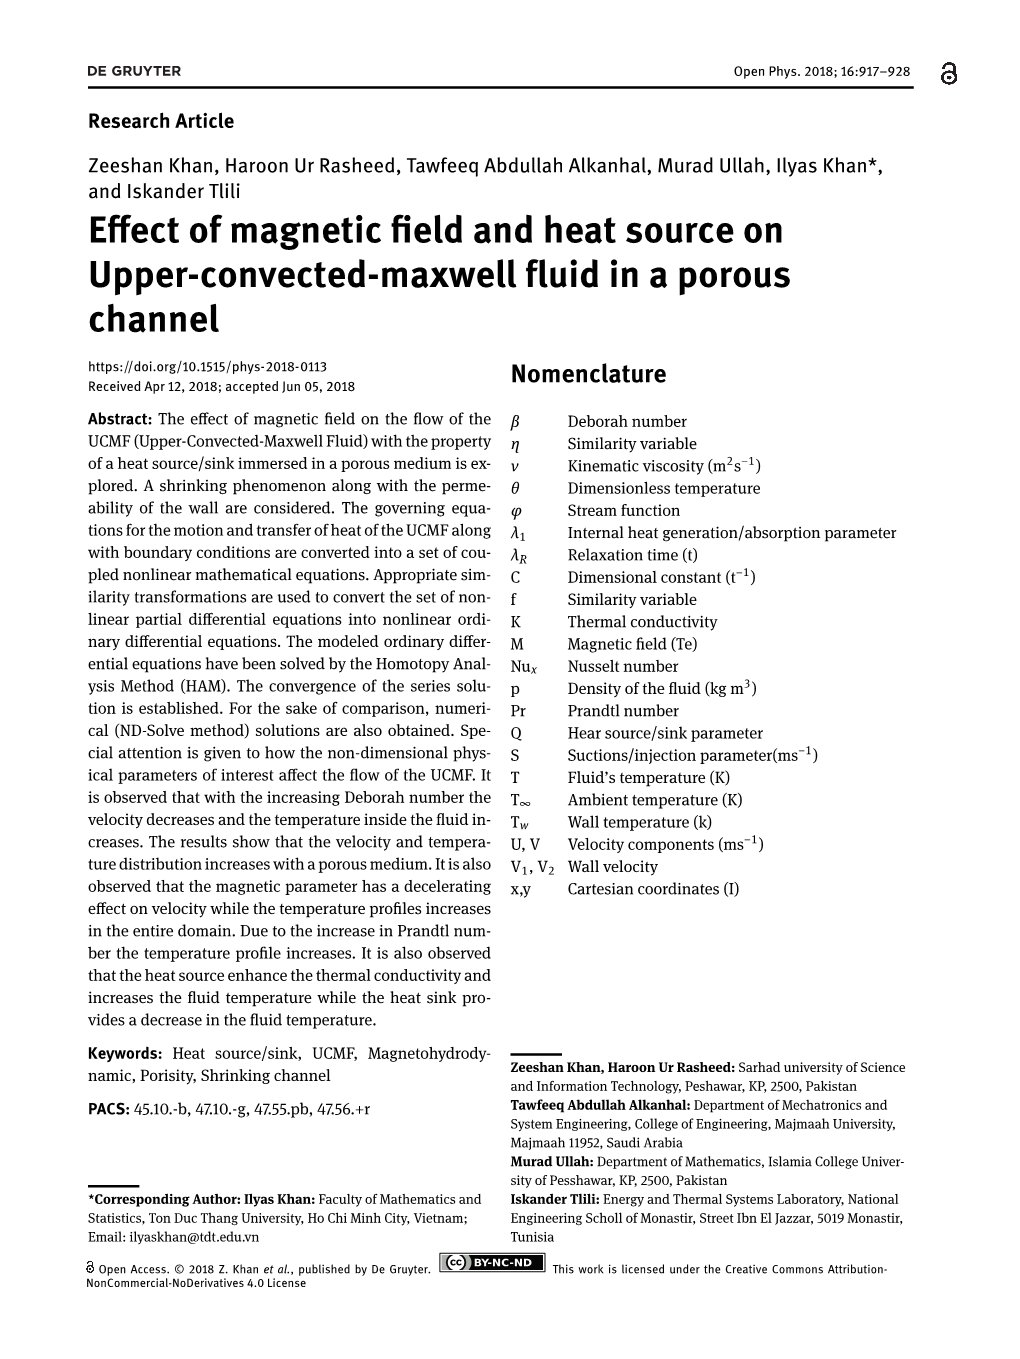 Effect of Magnetic Field and Heat Source on Upper-Convected-Maxwell Fluid in a Porous Channel